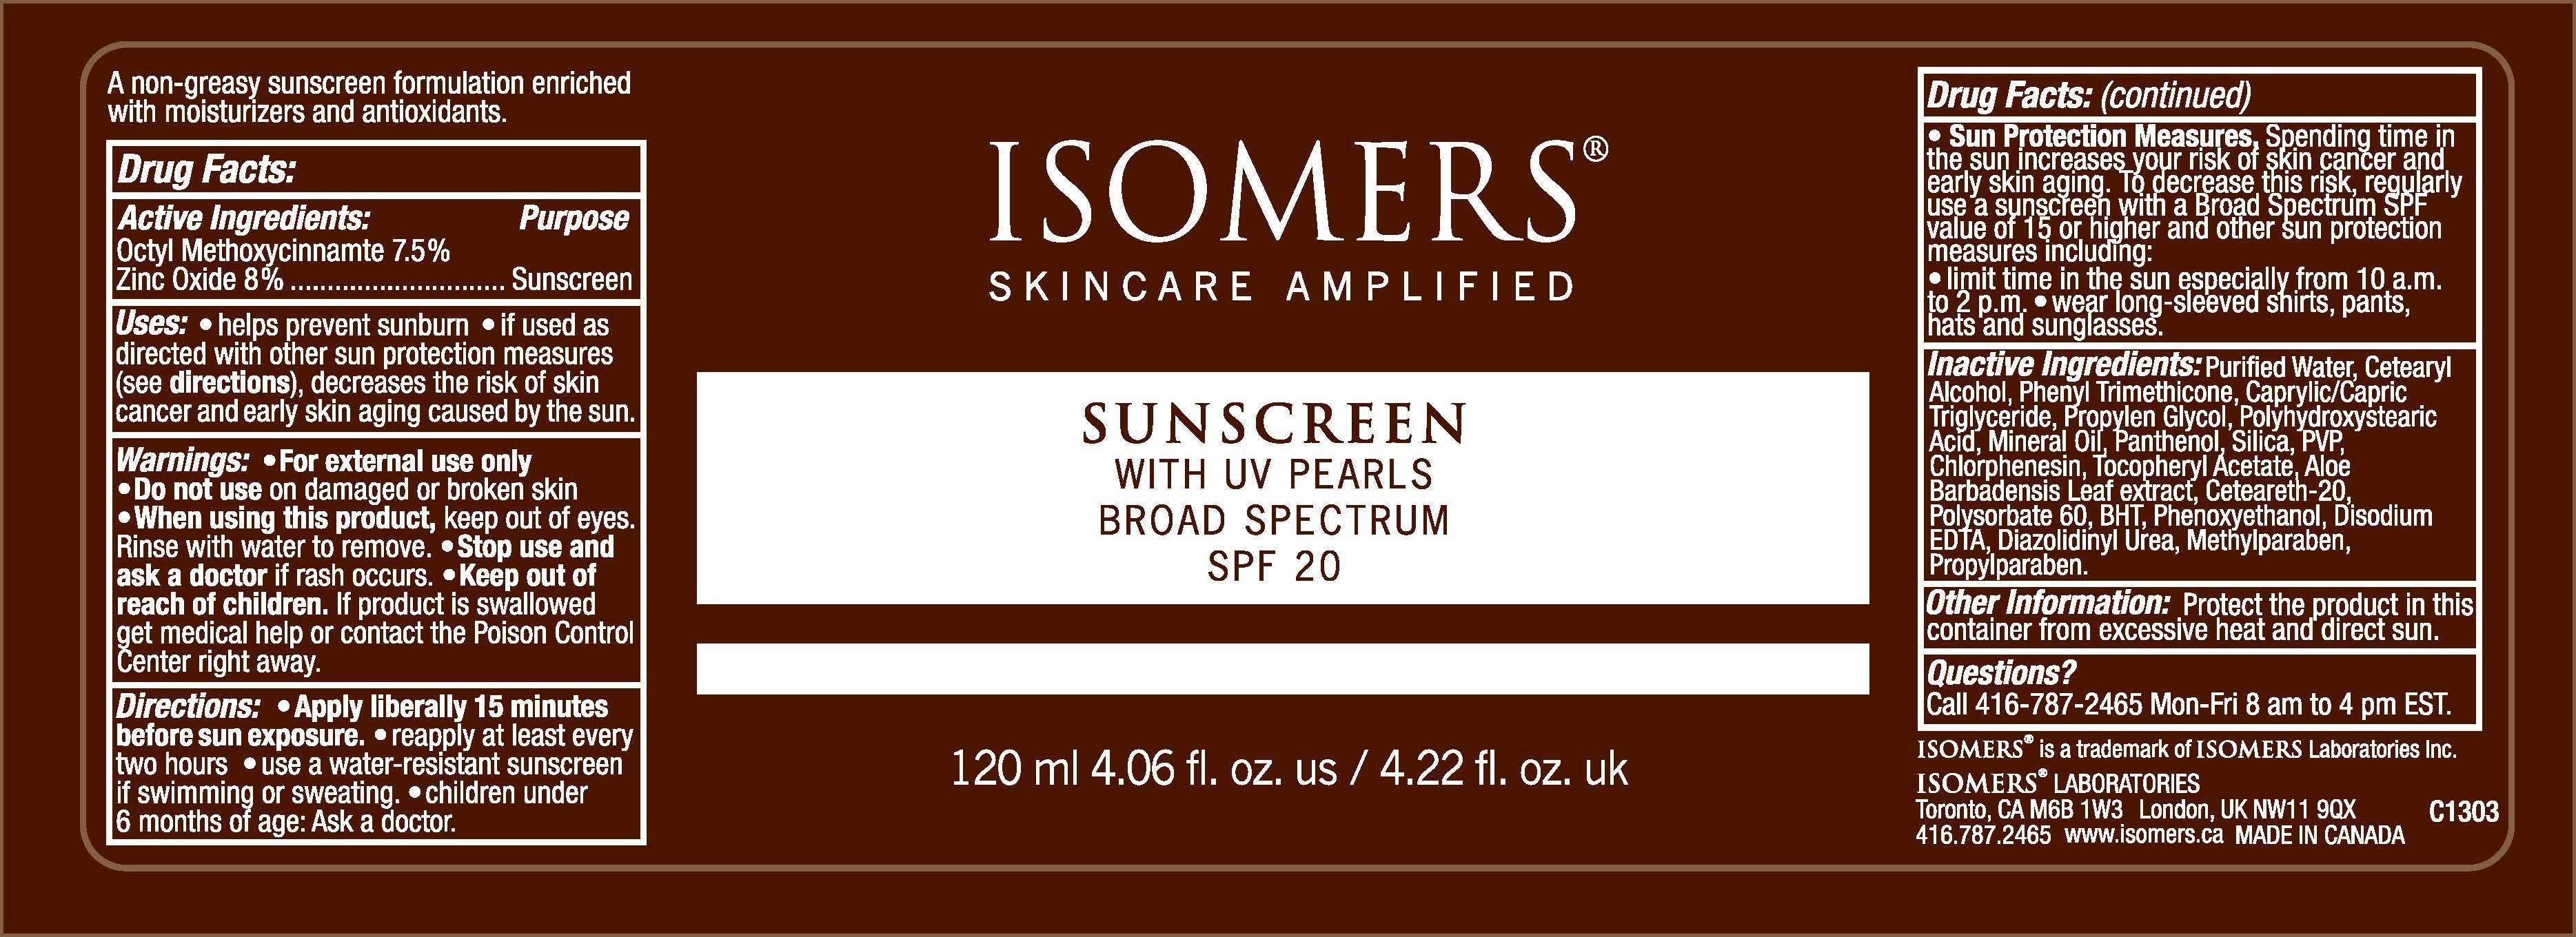 Isomers Sunscreen with UV pearls Broad Spectrm SPF 20